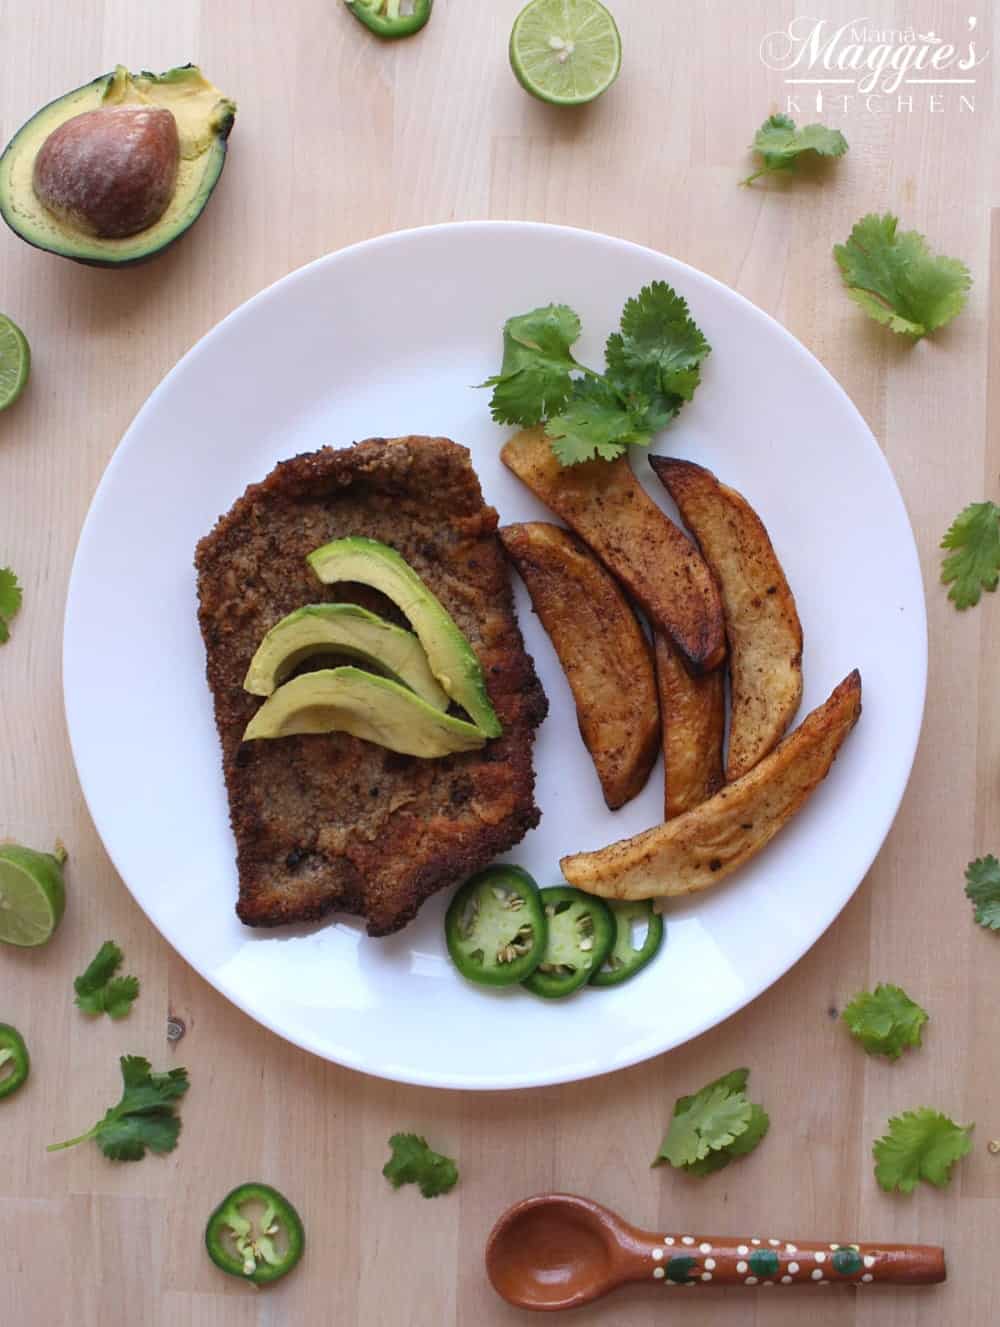 Milanesa de Res and homemade french fries sitting on a white plate. The meat is topped with avocado and surrounded by cilantro leaves.